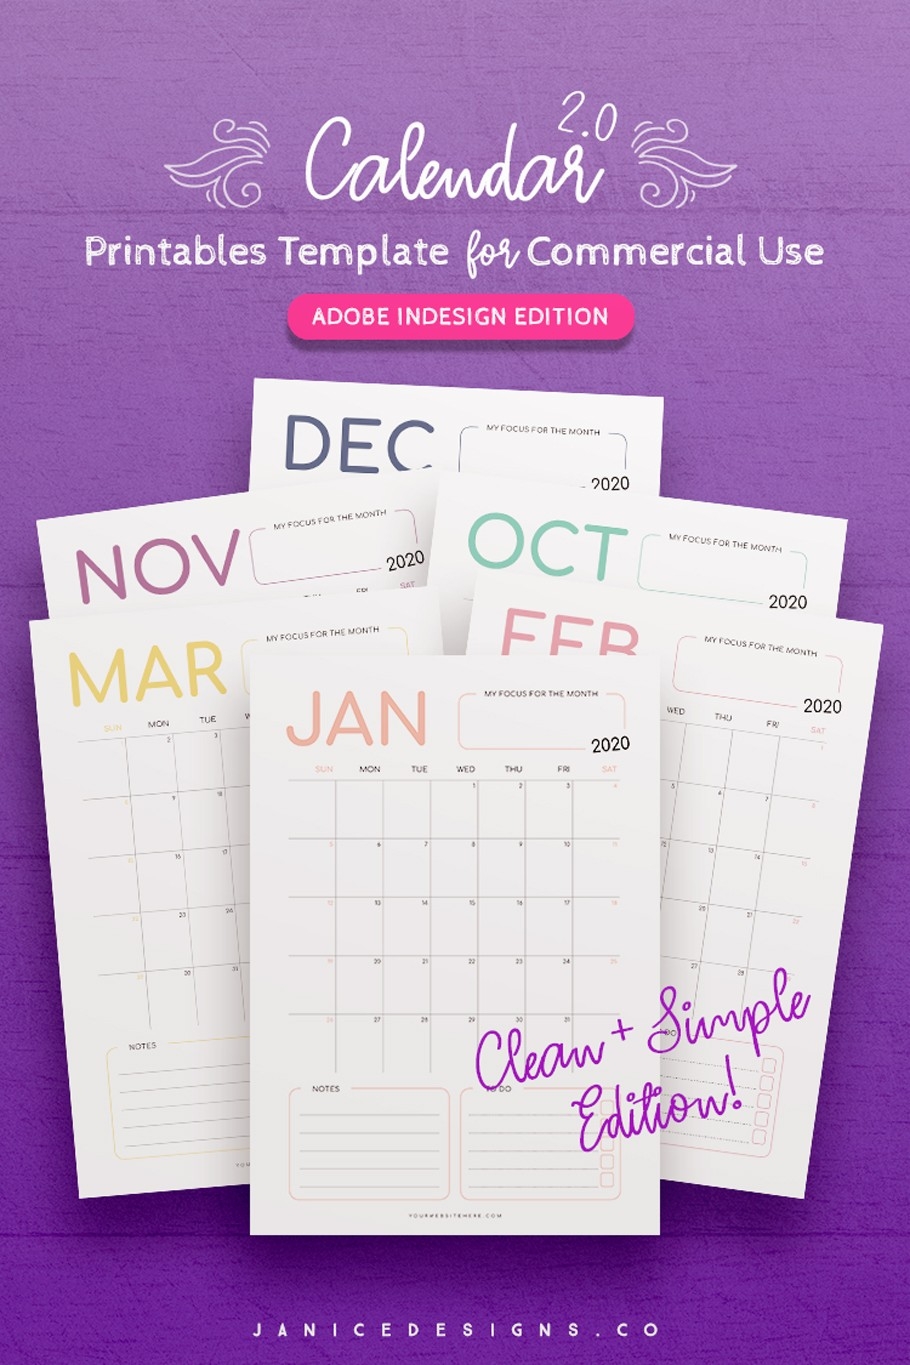 2020 Calendar Indesign Template For Commercial Use-Adobe Indesign Calendar Template 2020